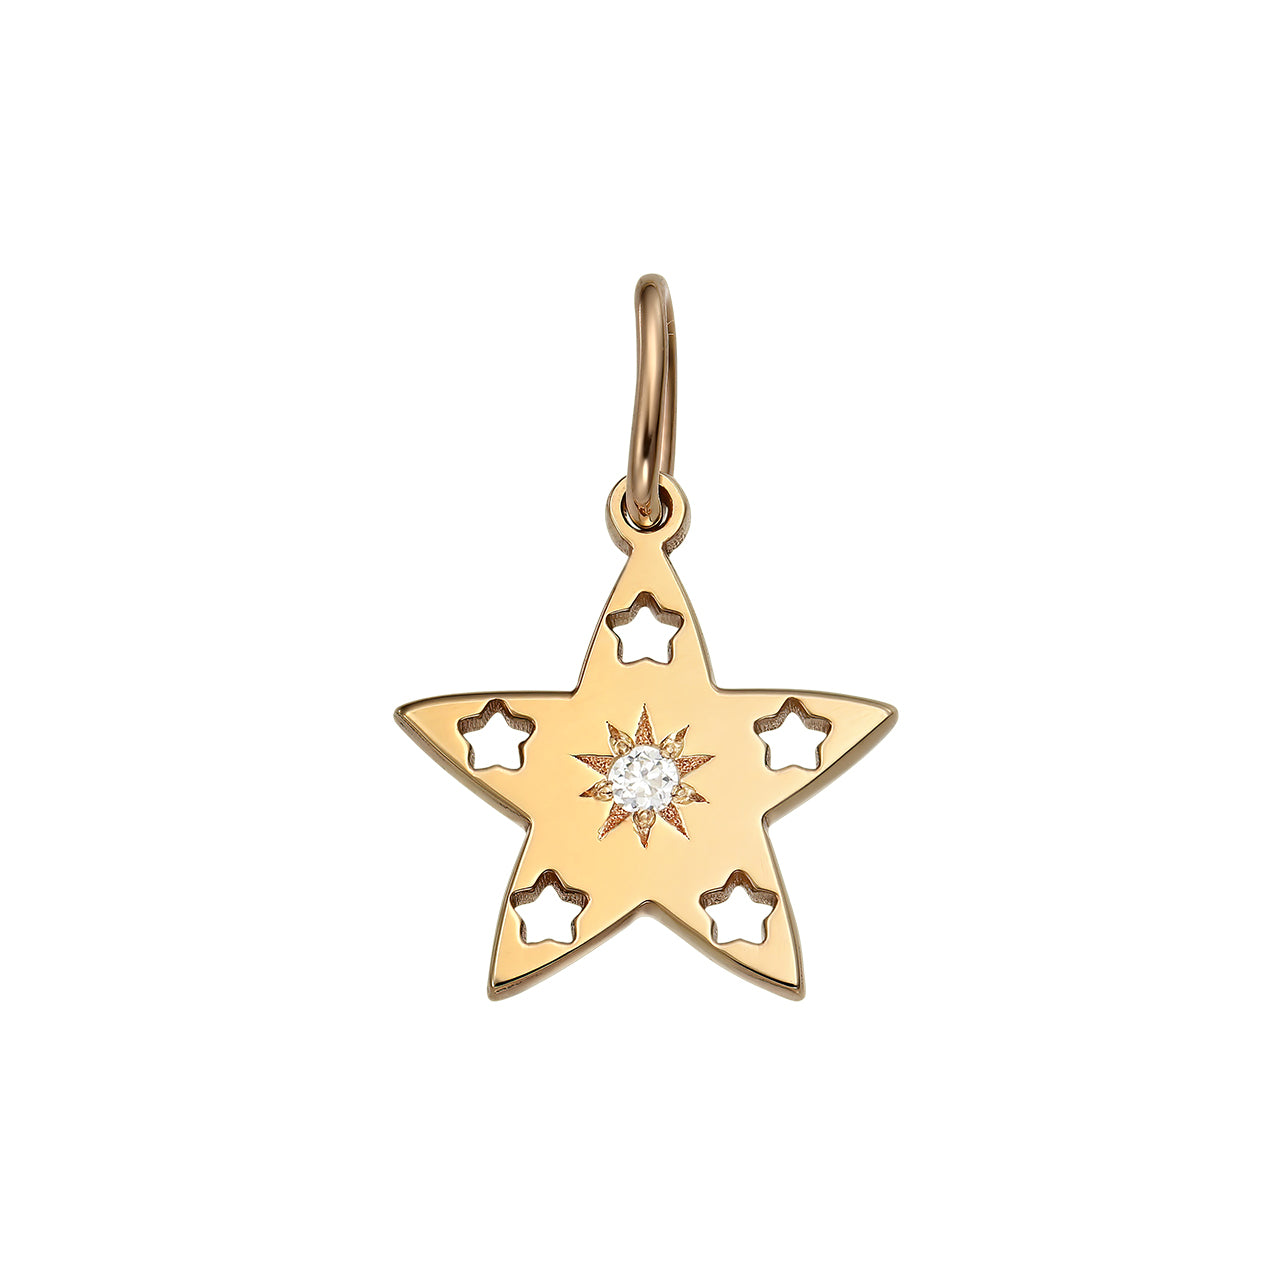 Pendant Shiny Star Constellation with white diamonds, in rose gold - zeaetsia